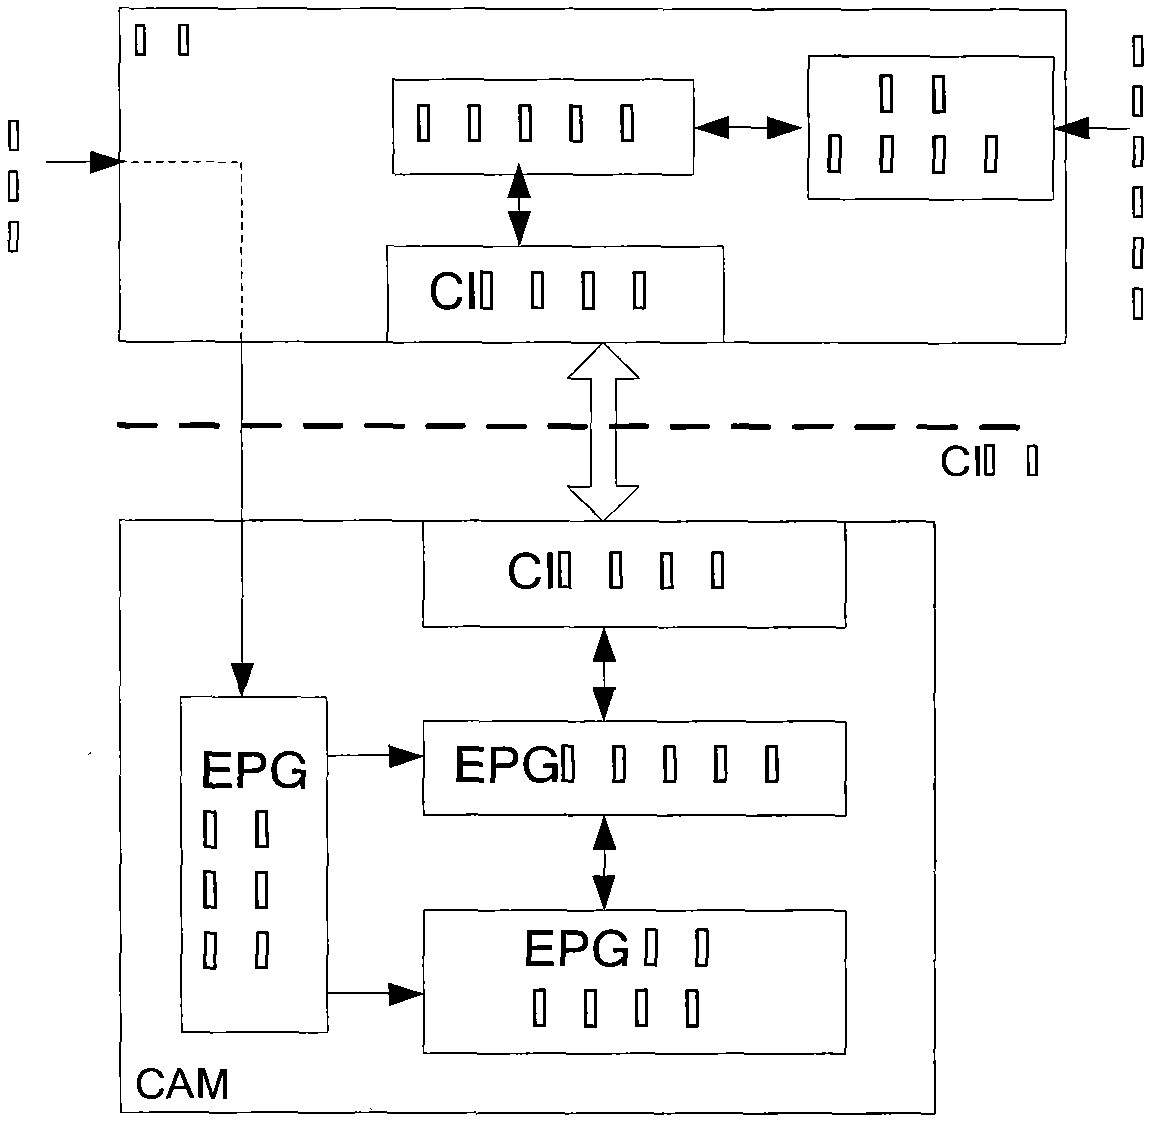 Conditional access device and method for implementing electronic program guide (EPG) therein